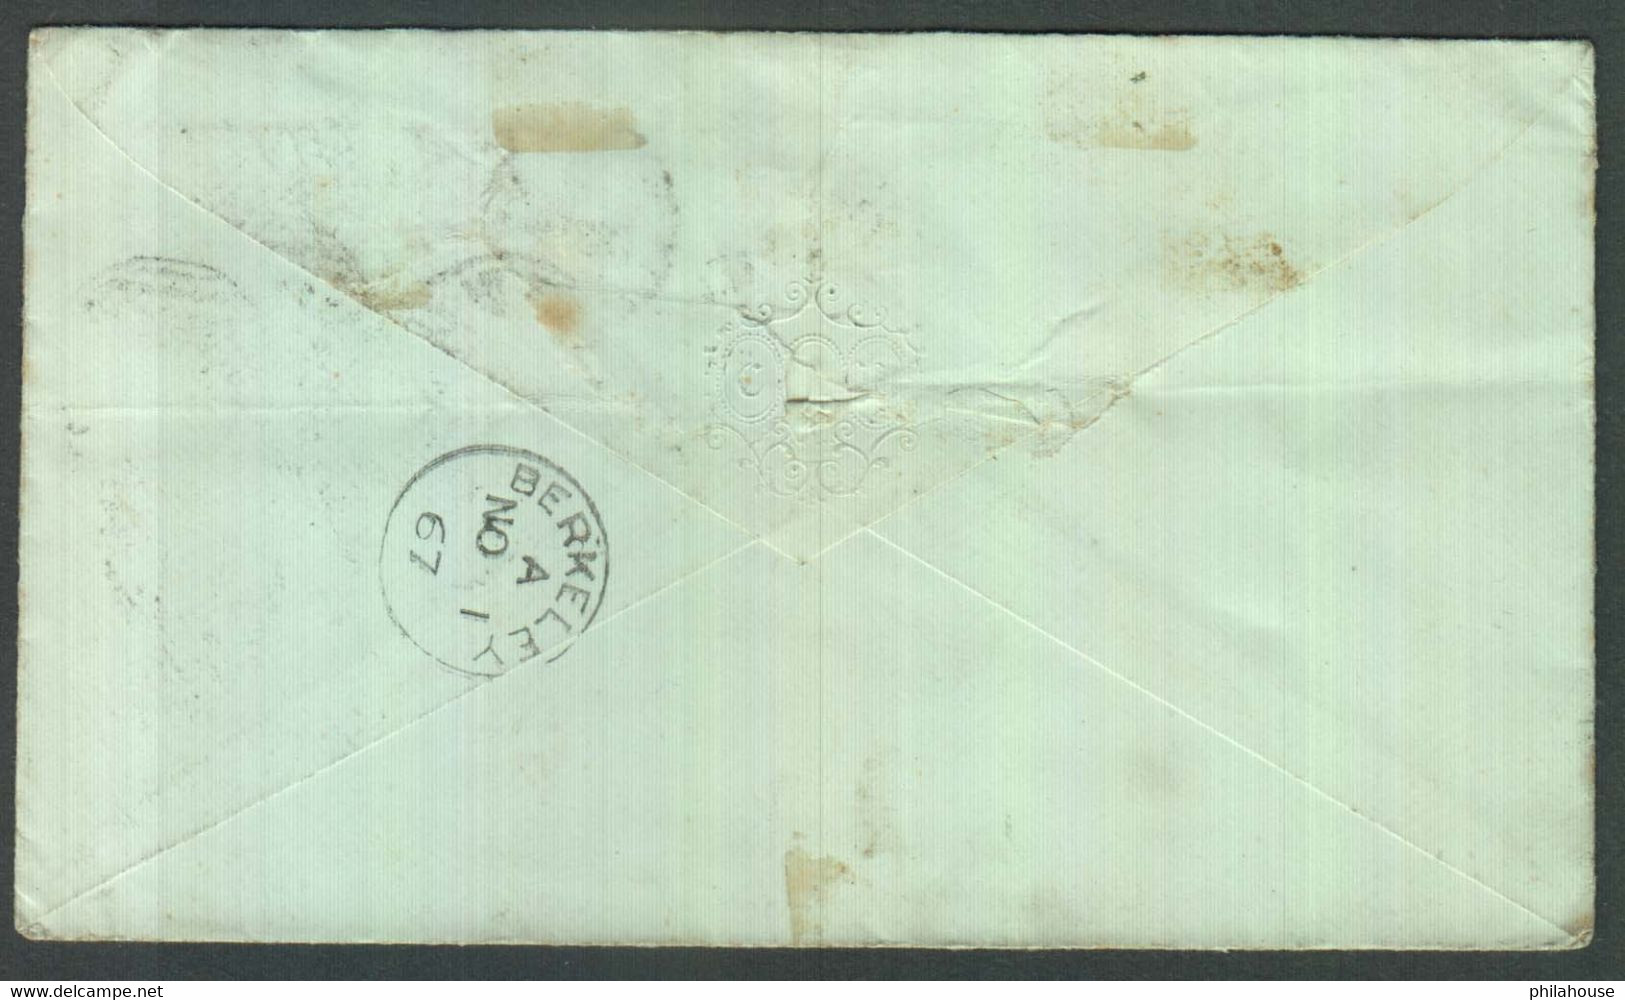 GB One Penny Red Stamps Plate # 90 On Cover WC/24 Duplex Cancellation Oct 31, 1867 With BERKELY Delivery Postmark - Covers & Documents